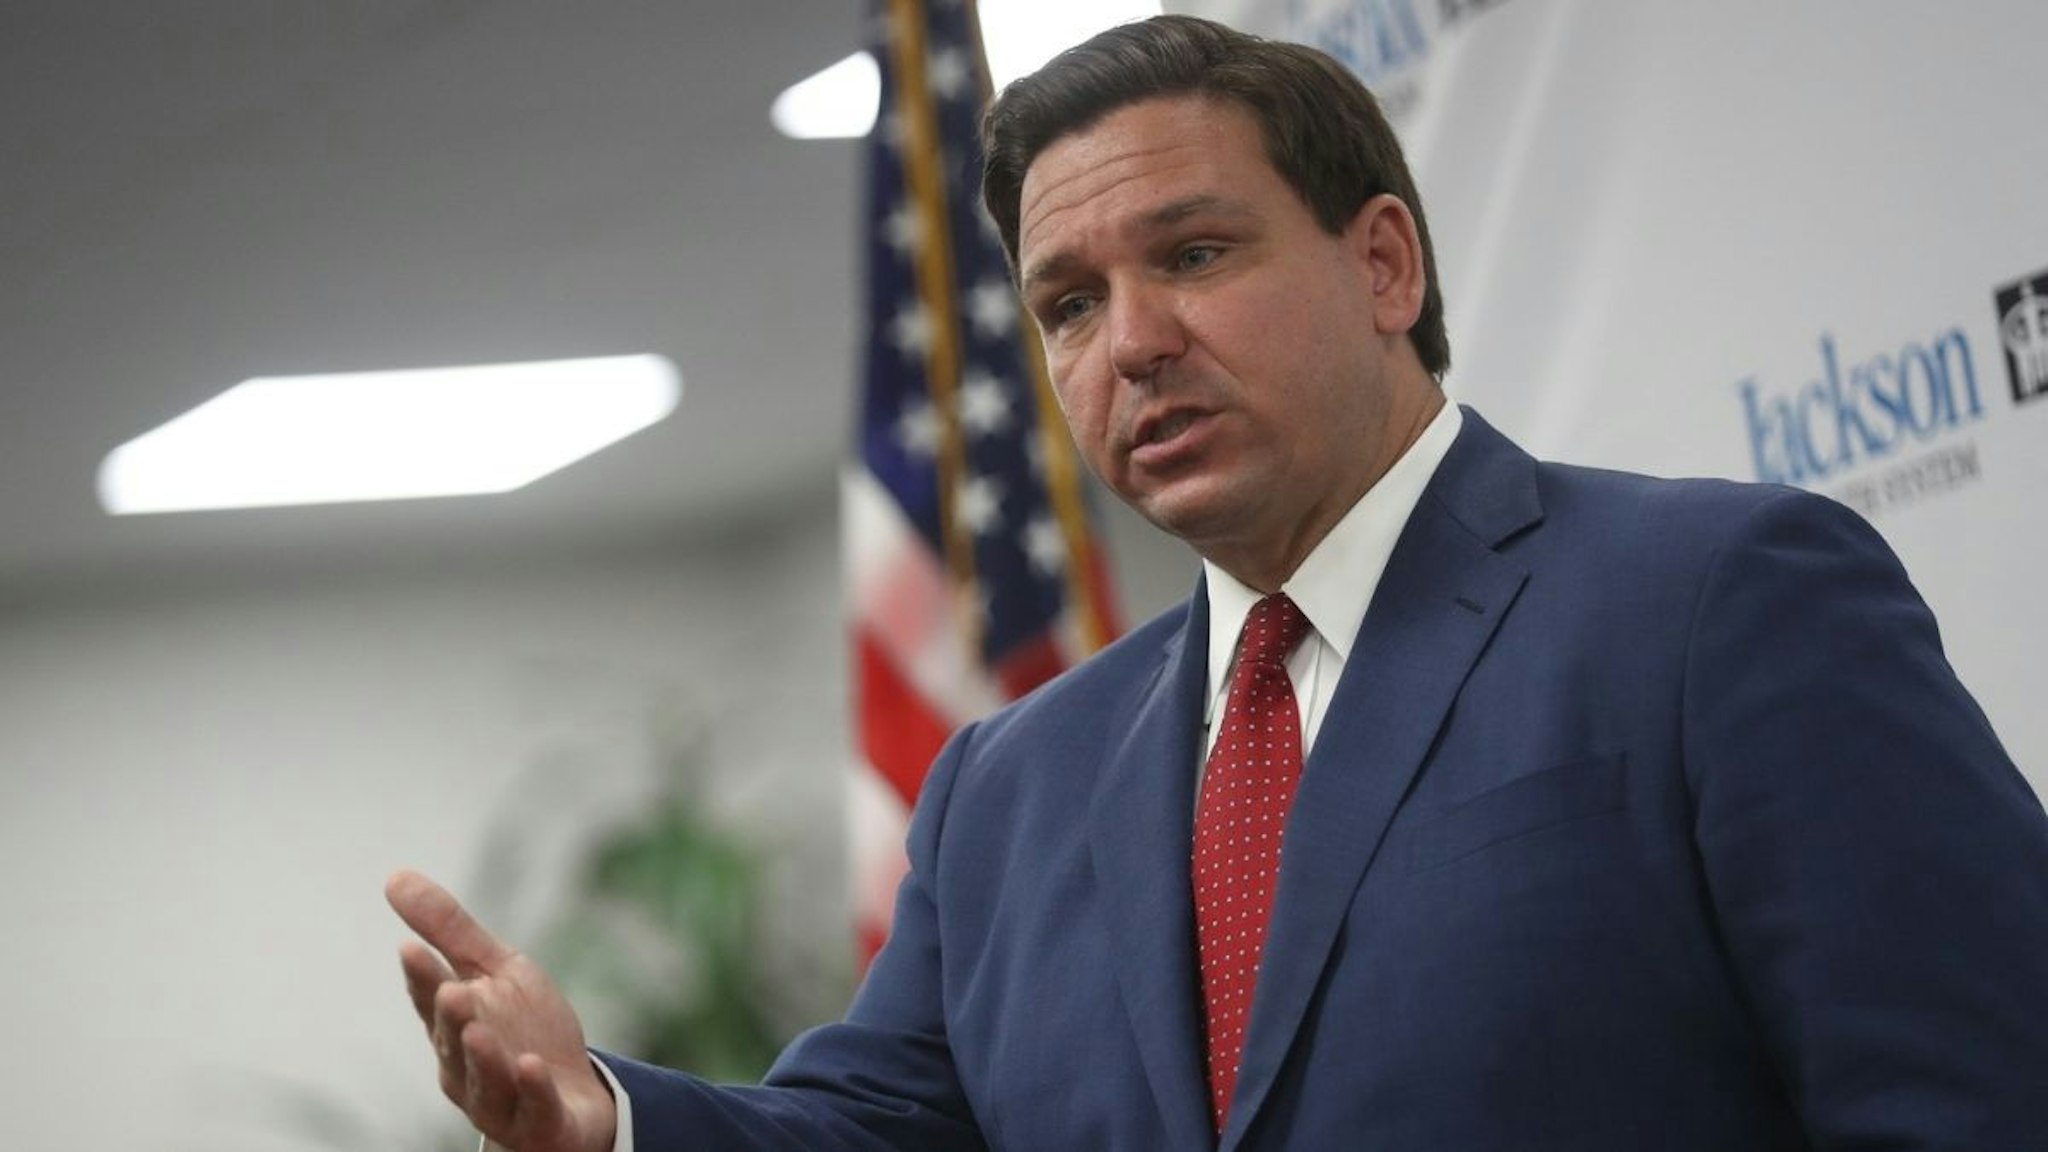 Florida Gov. Ron DeSantis speaks at a new conference on the surge in coronavirus cases in the state held at the Jackson Memorial Hospital on July 13, 2020 in Miami, Florida.